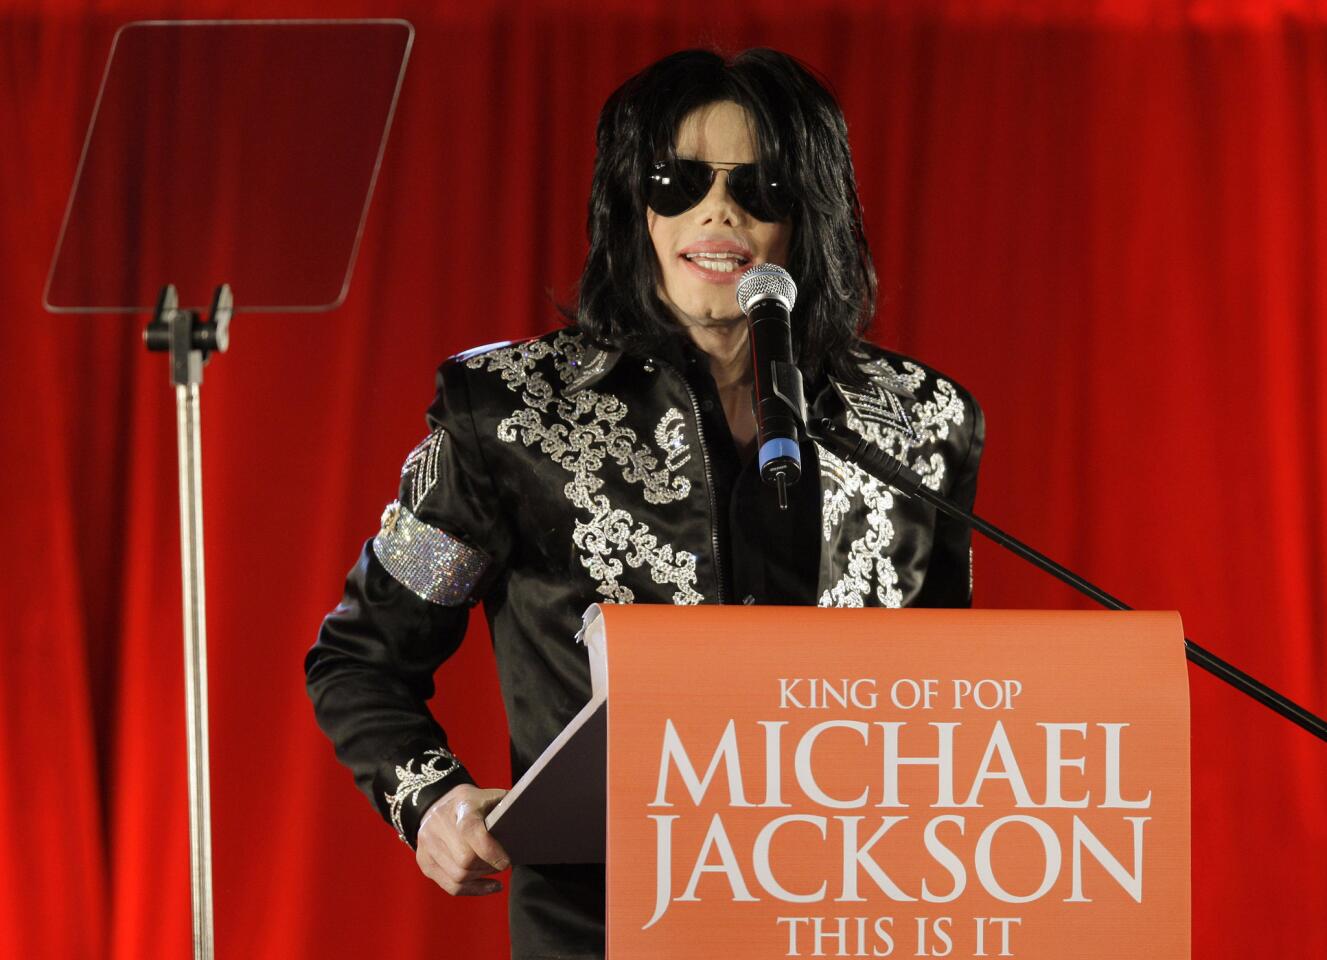 Last week, allegations that Michael Jackson fathered a 31-year-old singer had the Internet buzzing. Unsurprisingly the DNA "results" were doctored (the son in question denied involvement). Amid the hoopla, Timbaland released a snippet of a remixed "Slave to the Rhythm," which is supposedly pulled from a new posthumous Jackson record. A version with Justin Bieber trading vocals with Jackson over a generic Europop beat hit the 'Net last year was a lot better, and that's not saying much.